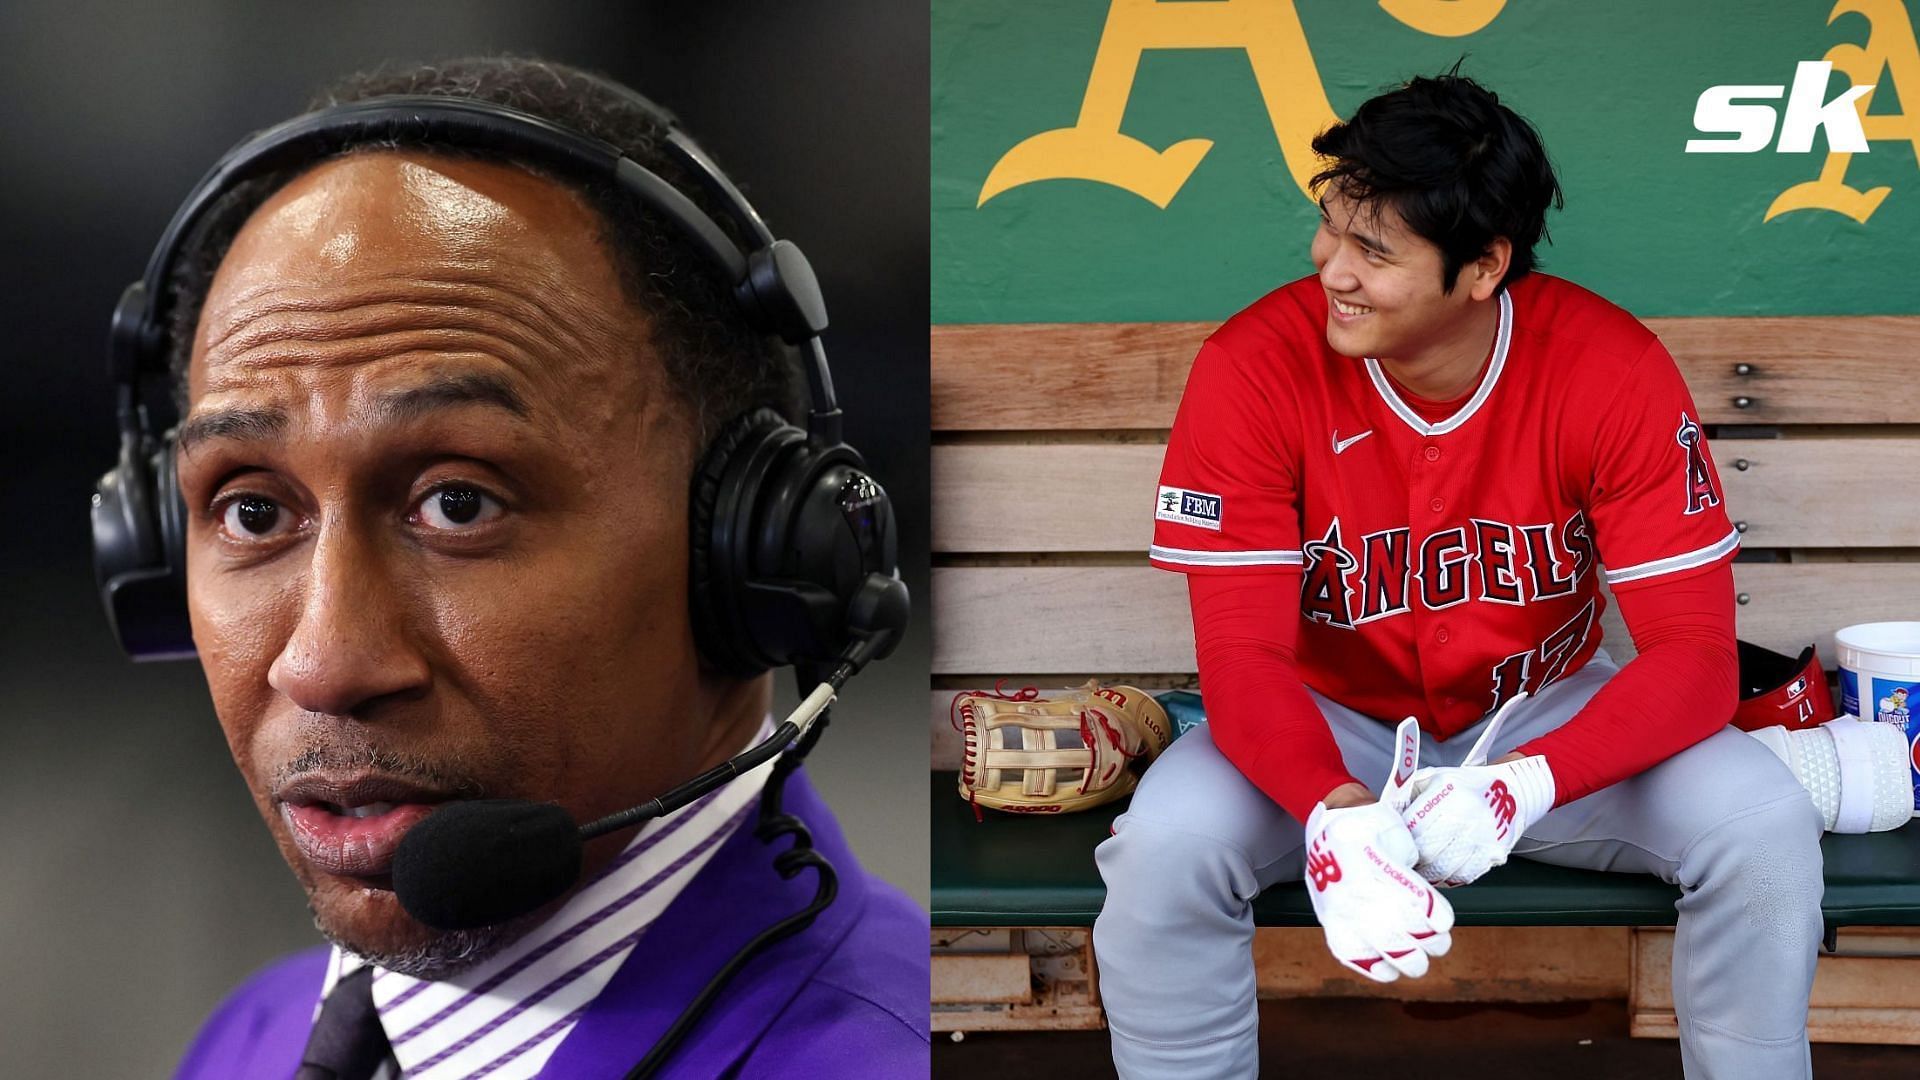 Stephen A. Smith faced considerable backlash from ESPN colleagues following insensitive comments over Shohei Ohtani